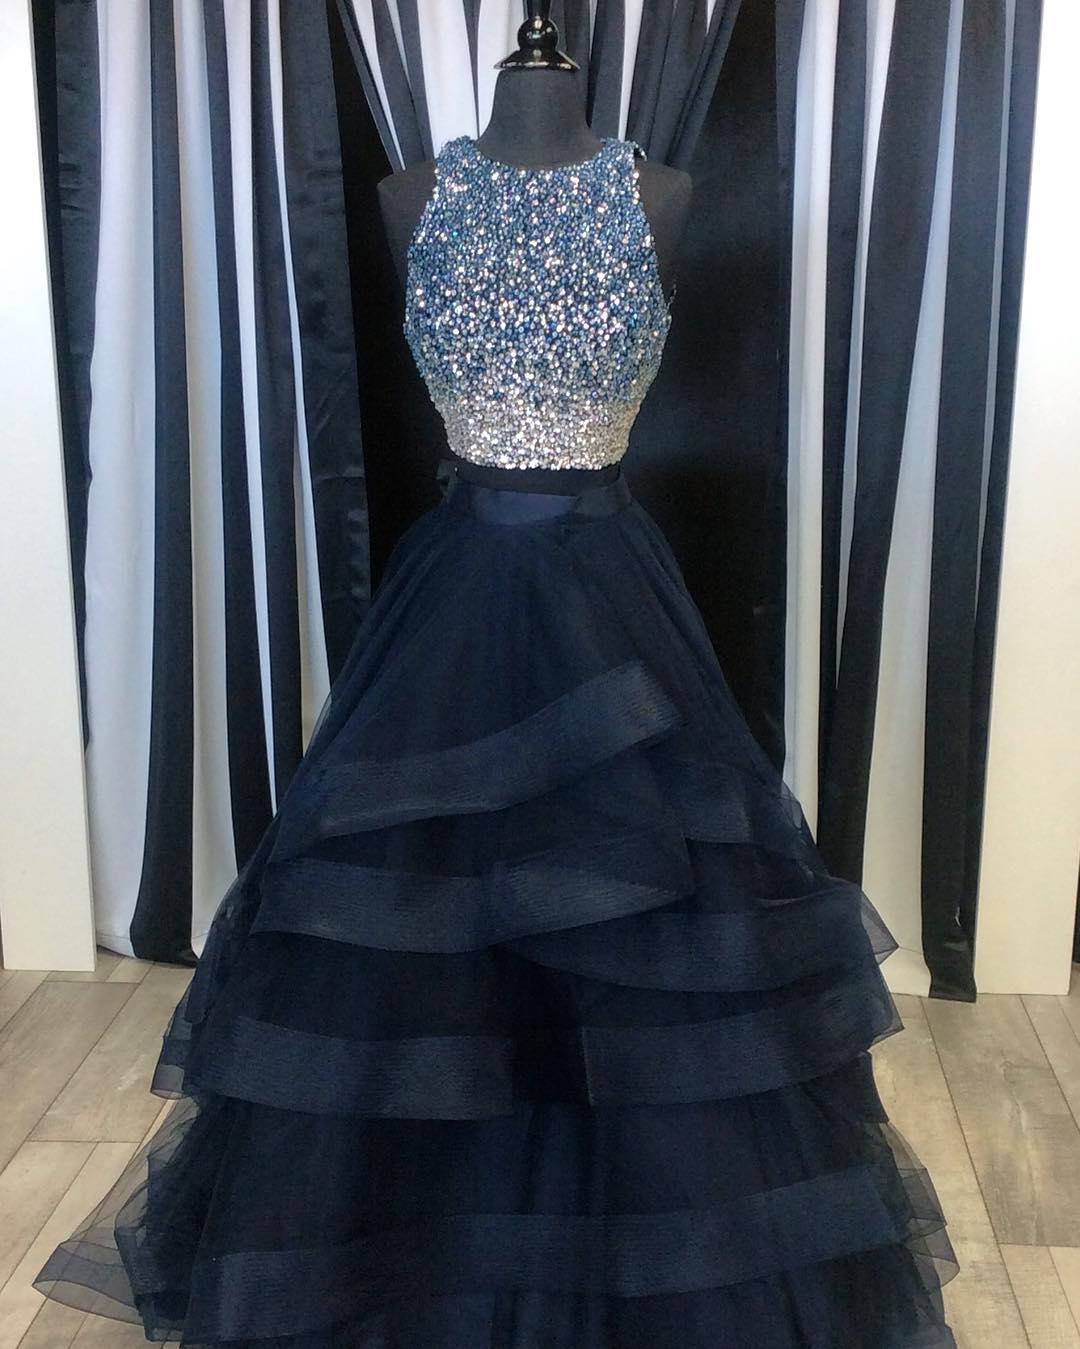 Prom Dresses Party Dresses Two Piece Prom Dresses Ruffles Ball Gowns Sparkly Sequins Dress 2